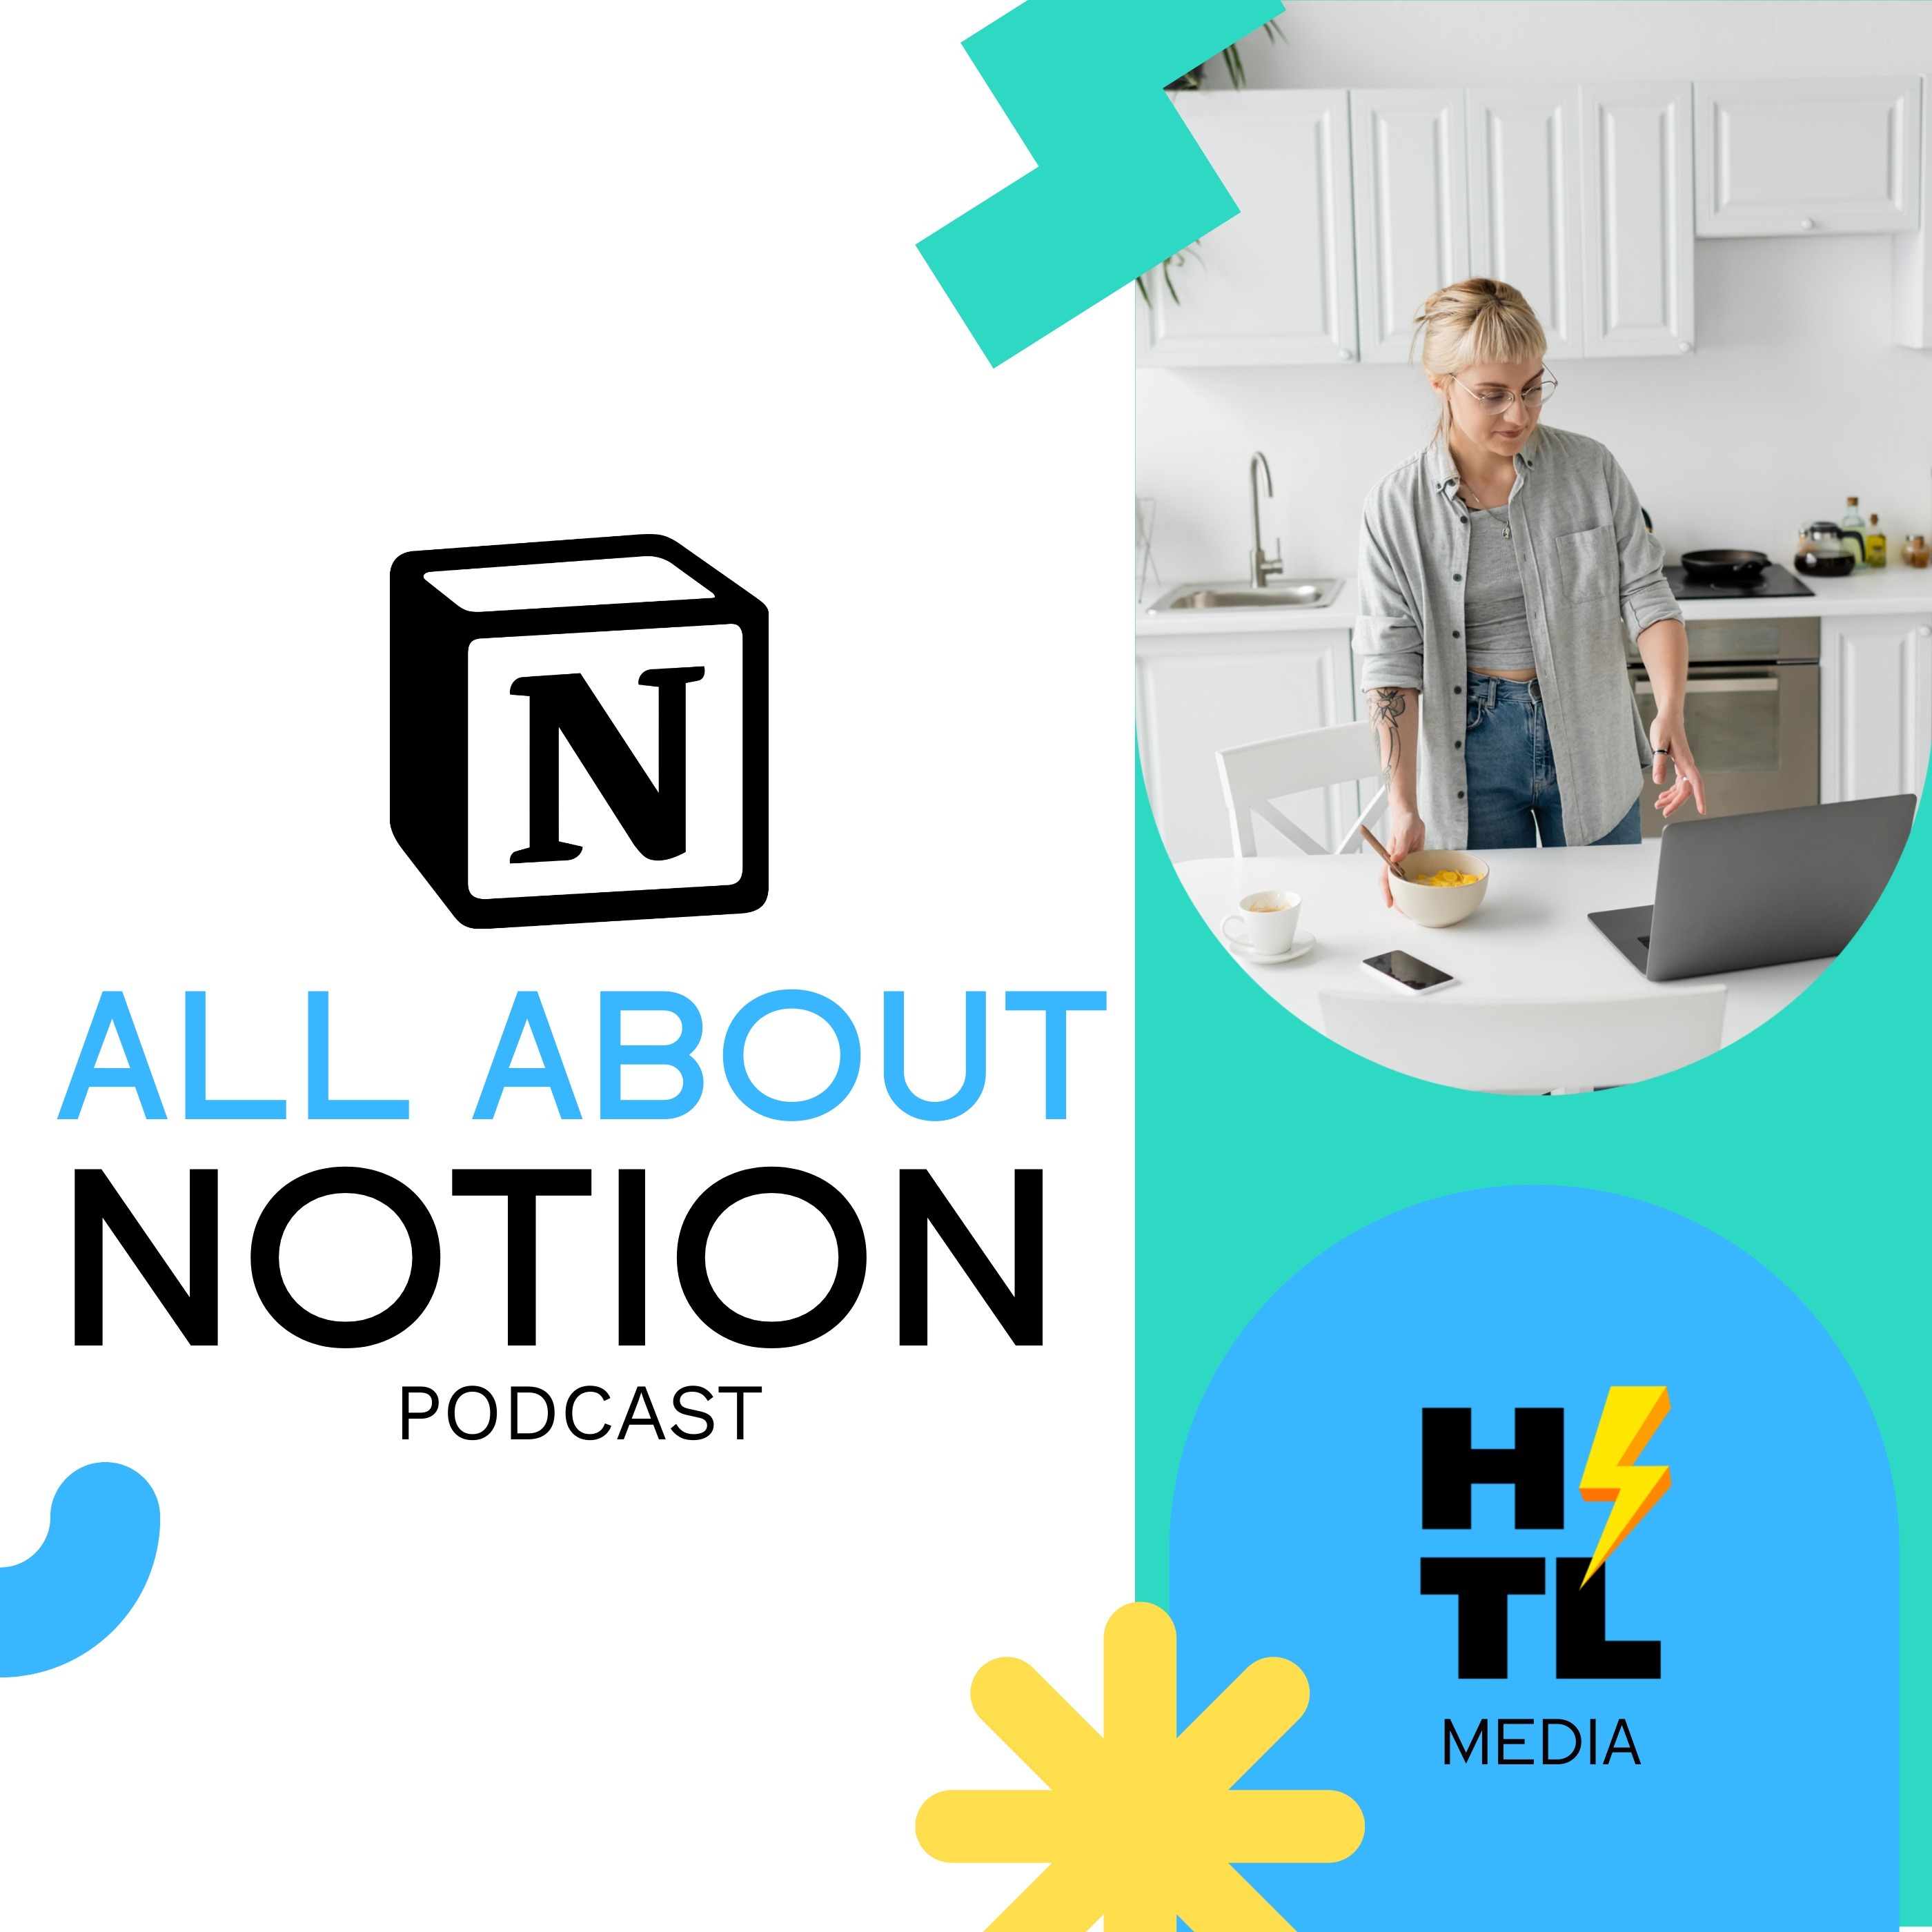 All About Notion Podcast